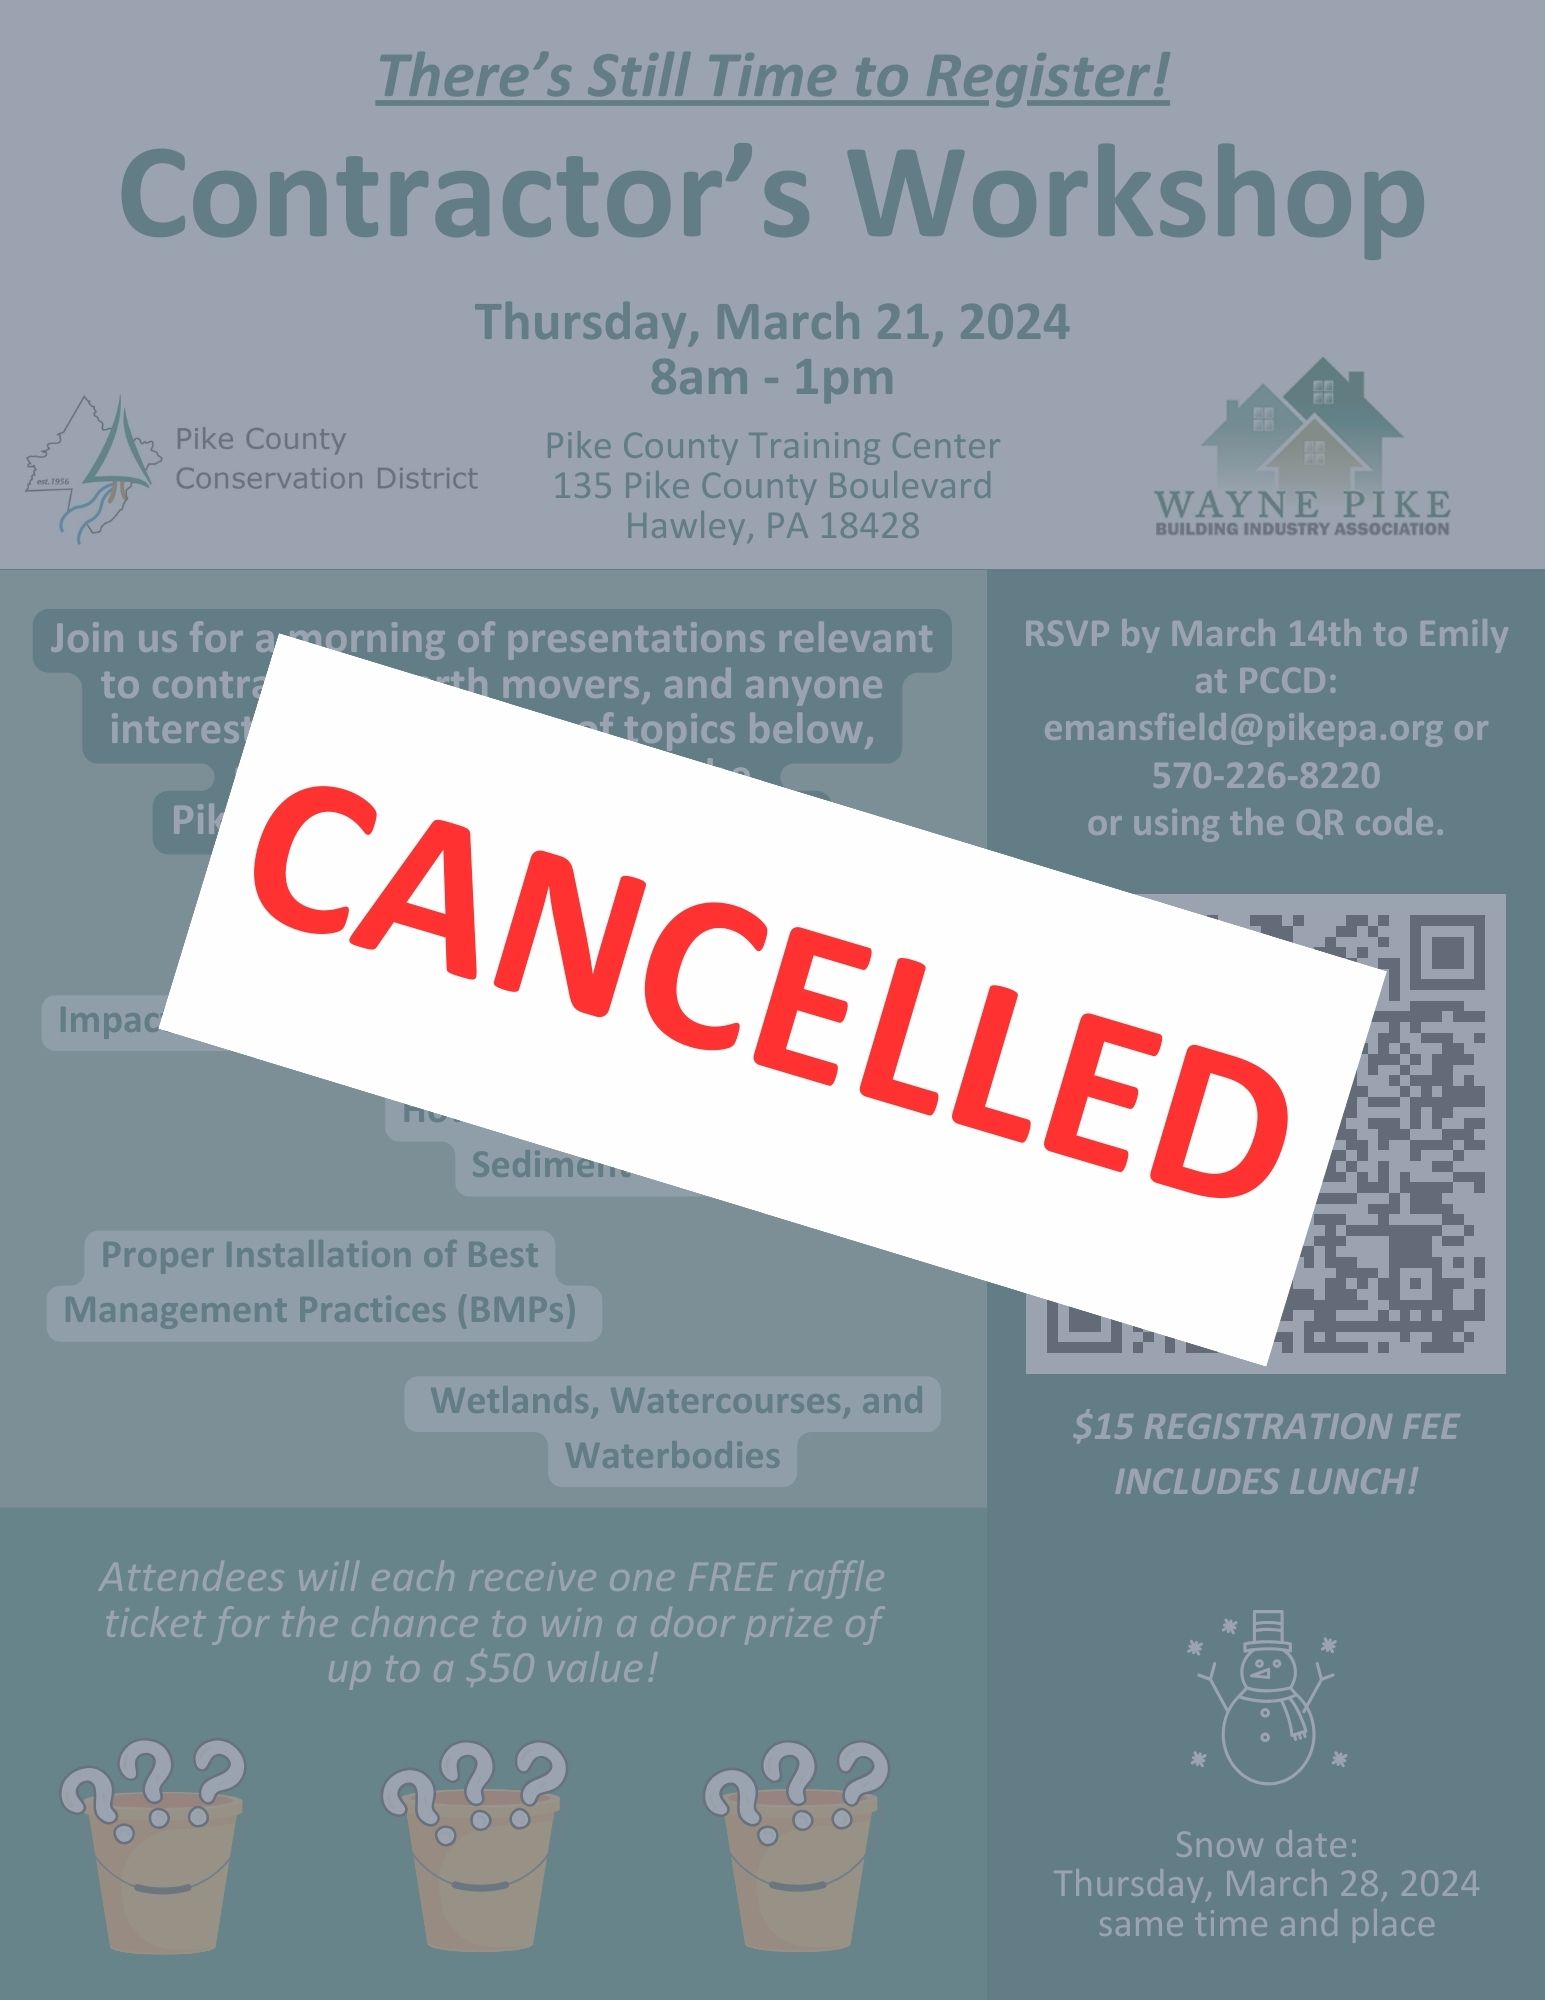 Flyer for the Contractor's Workshop with the text "Cancelled" overlaid